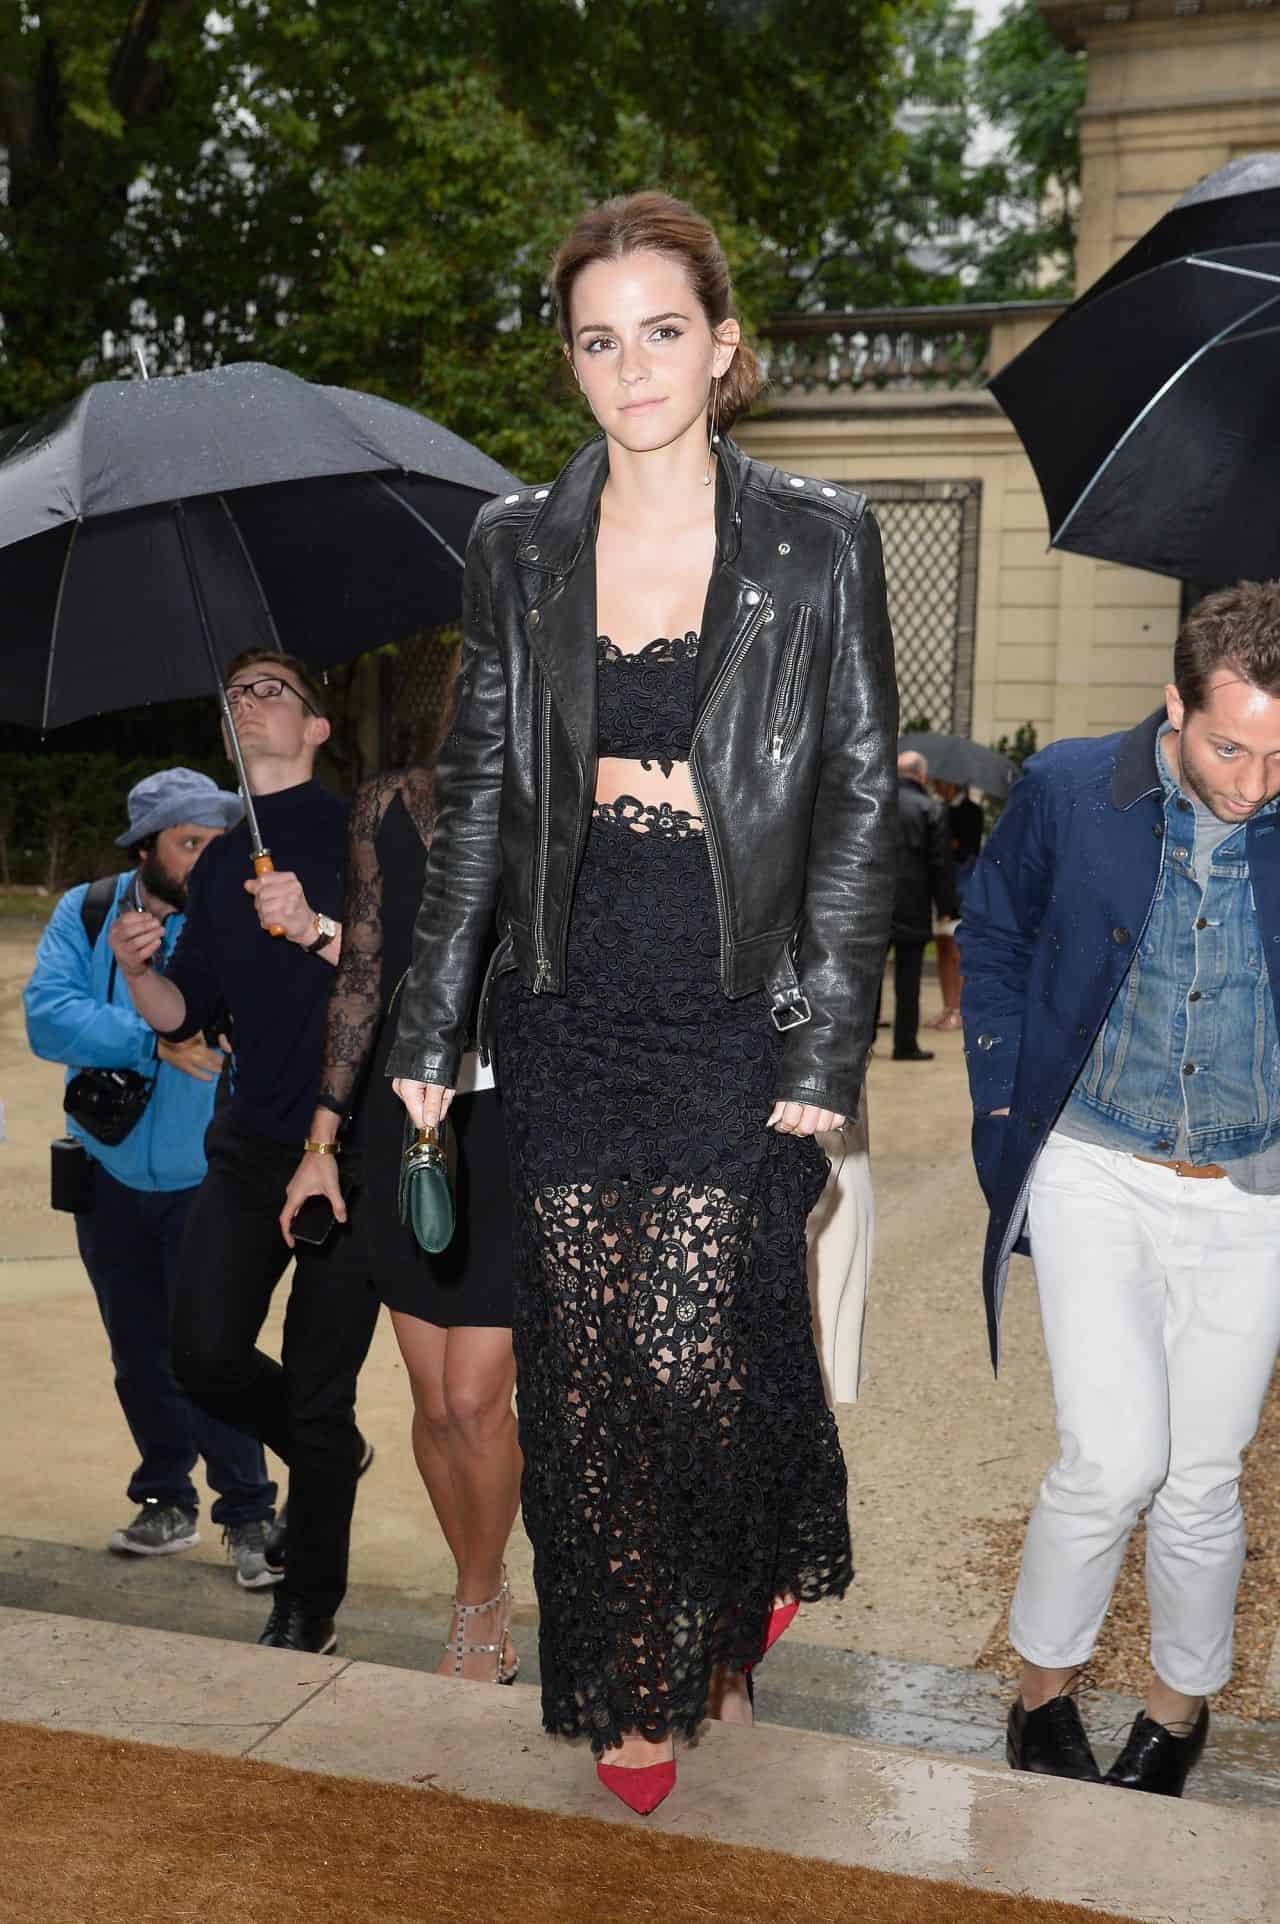 Emma Watson Stuns in a Daring Lace Look During the Valentino Couture Show